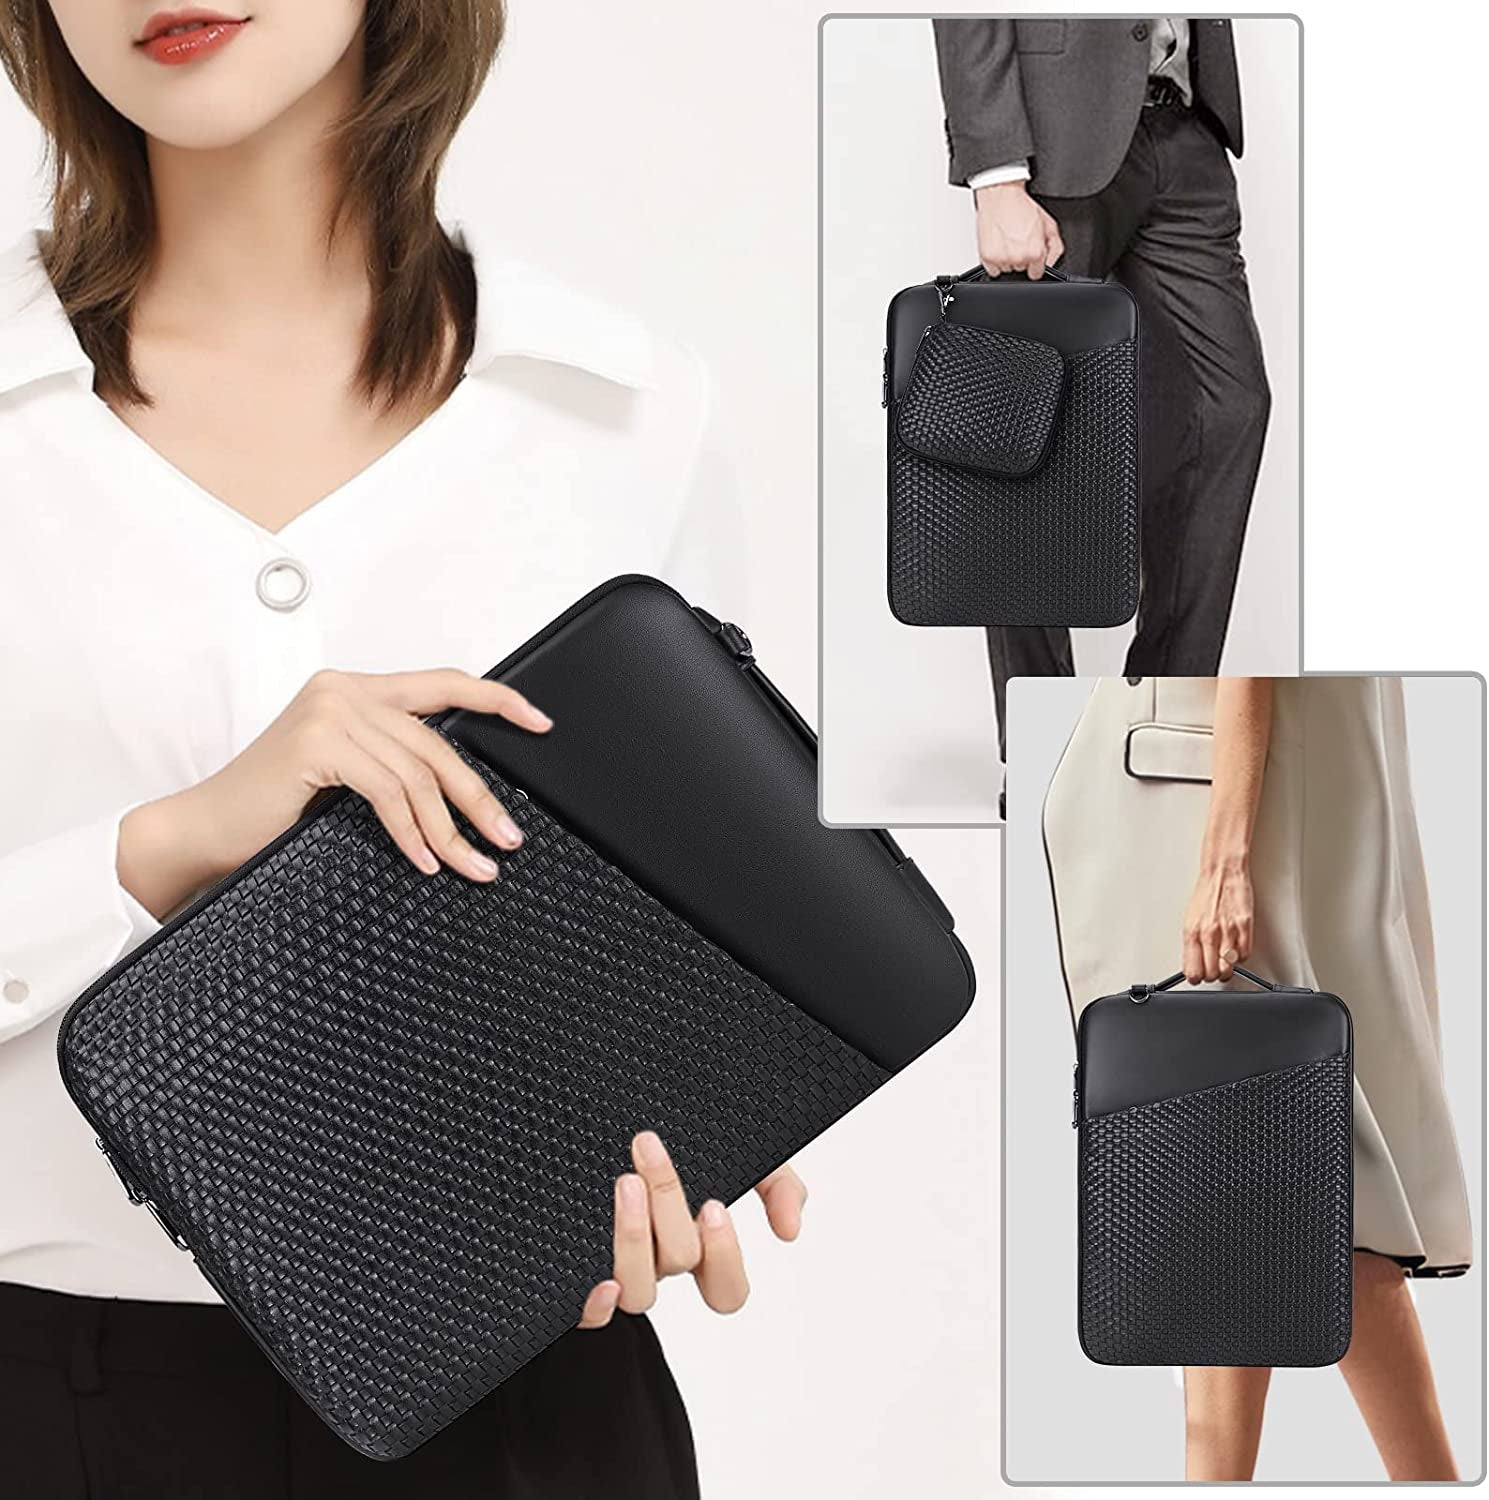 Stylish and Modern Leather Laptop Sleeve 14-15.6 Inch Laptop Case Waterproof Handle Business Laptop Bag Compatible with Macbook Pro, Macbook Air, Hp, Lenovo, IBM, Dell, Asus Notebook